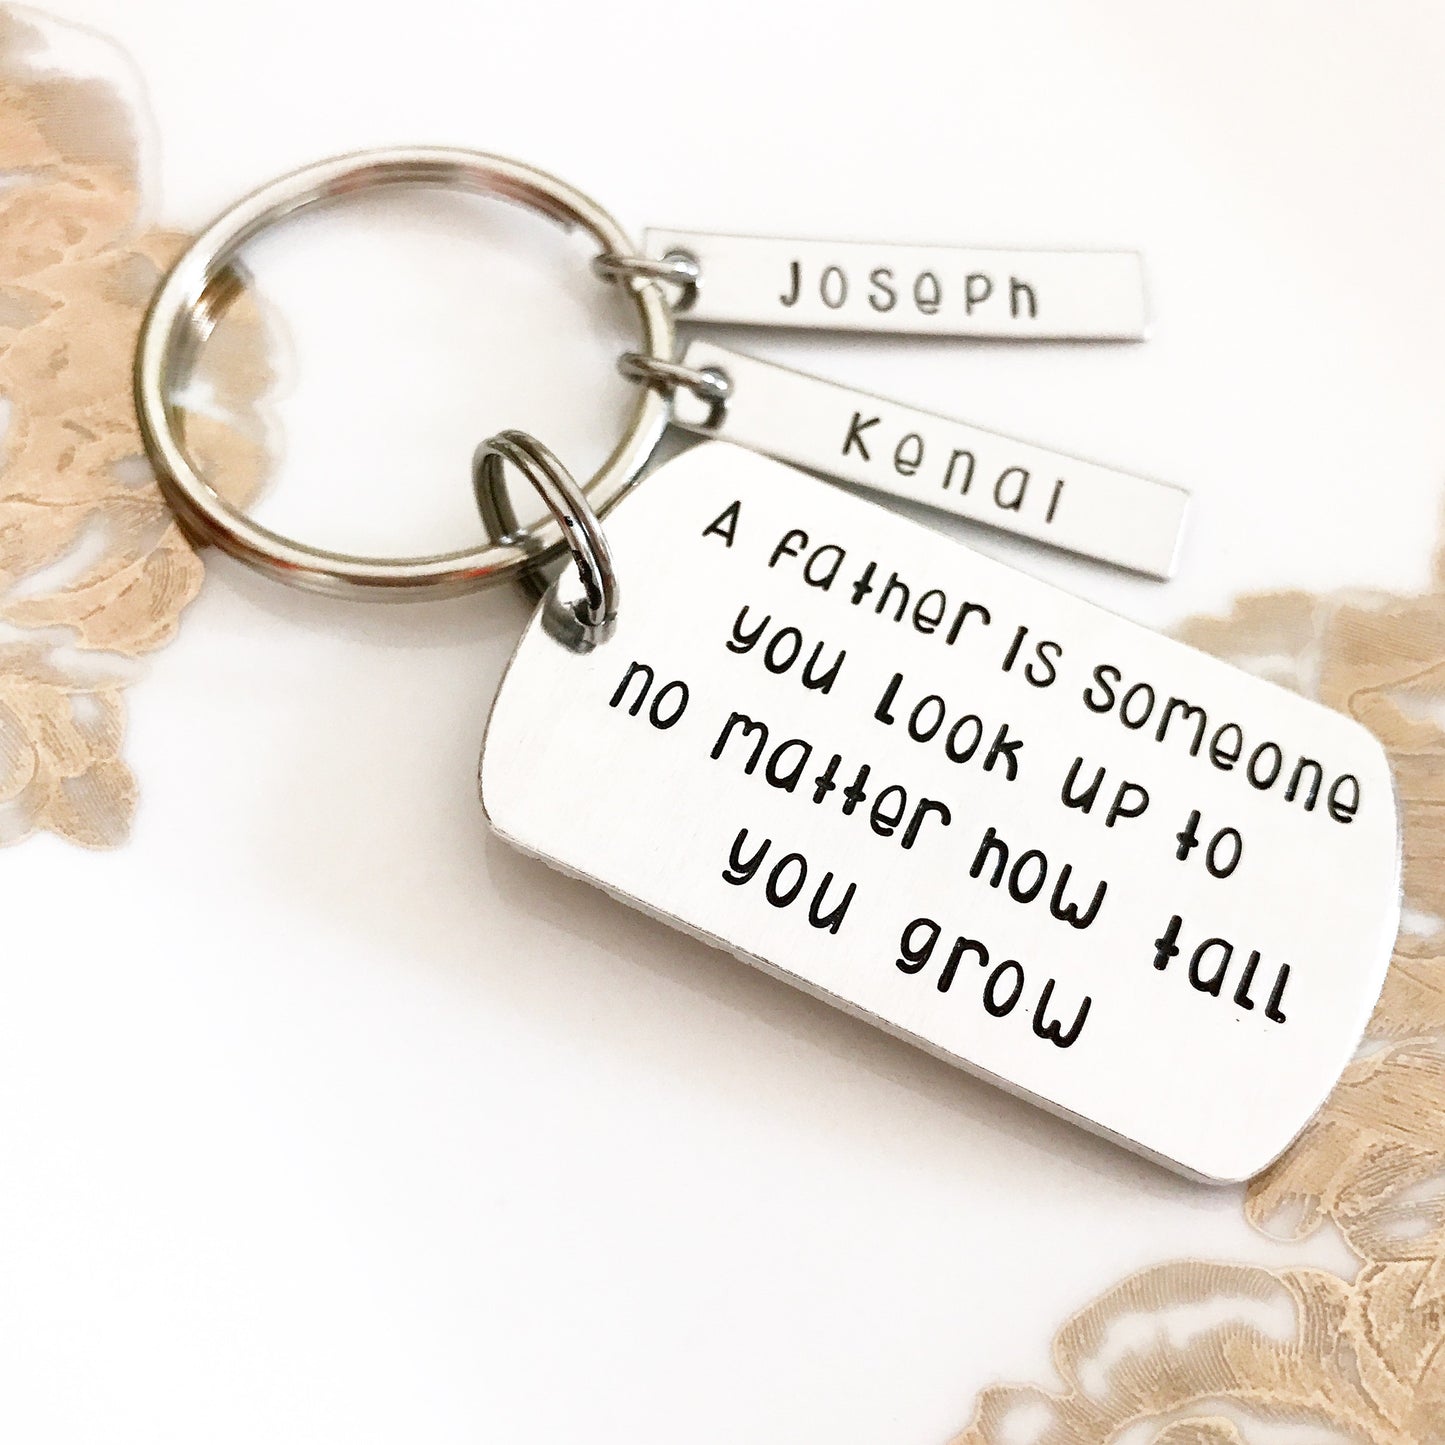 A FATHER IS SOMEONE YOU LOOK UP TO KEYCHAIN